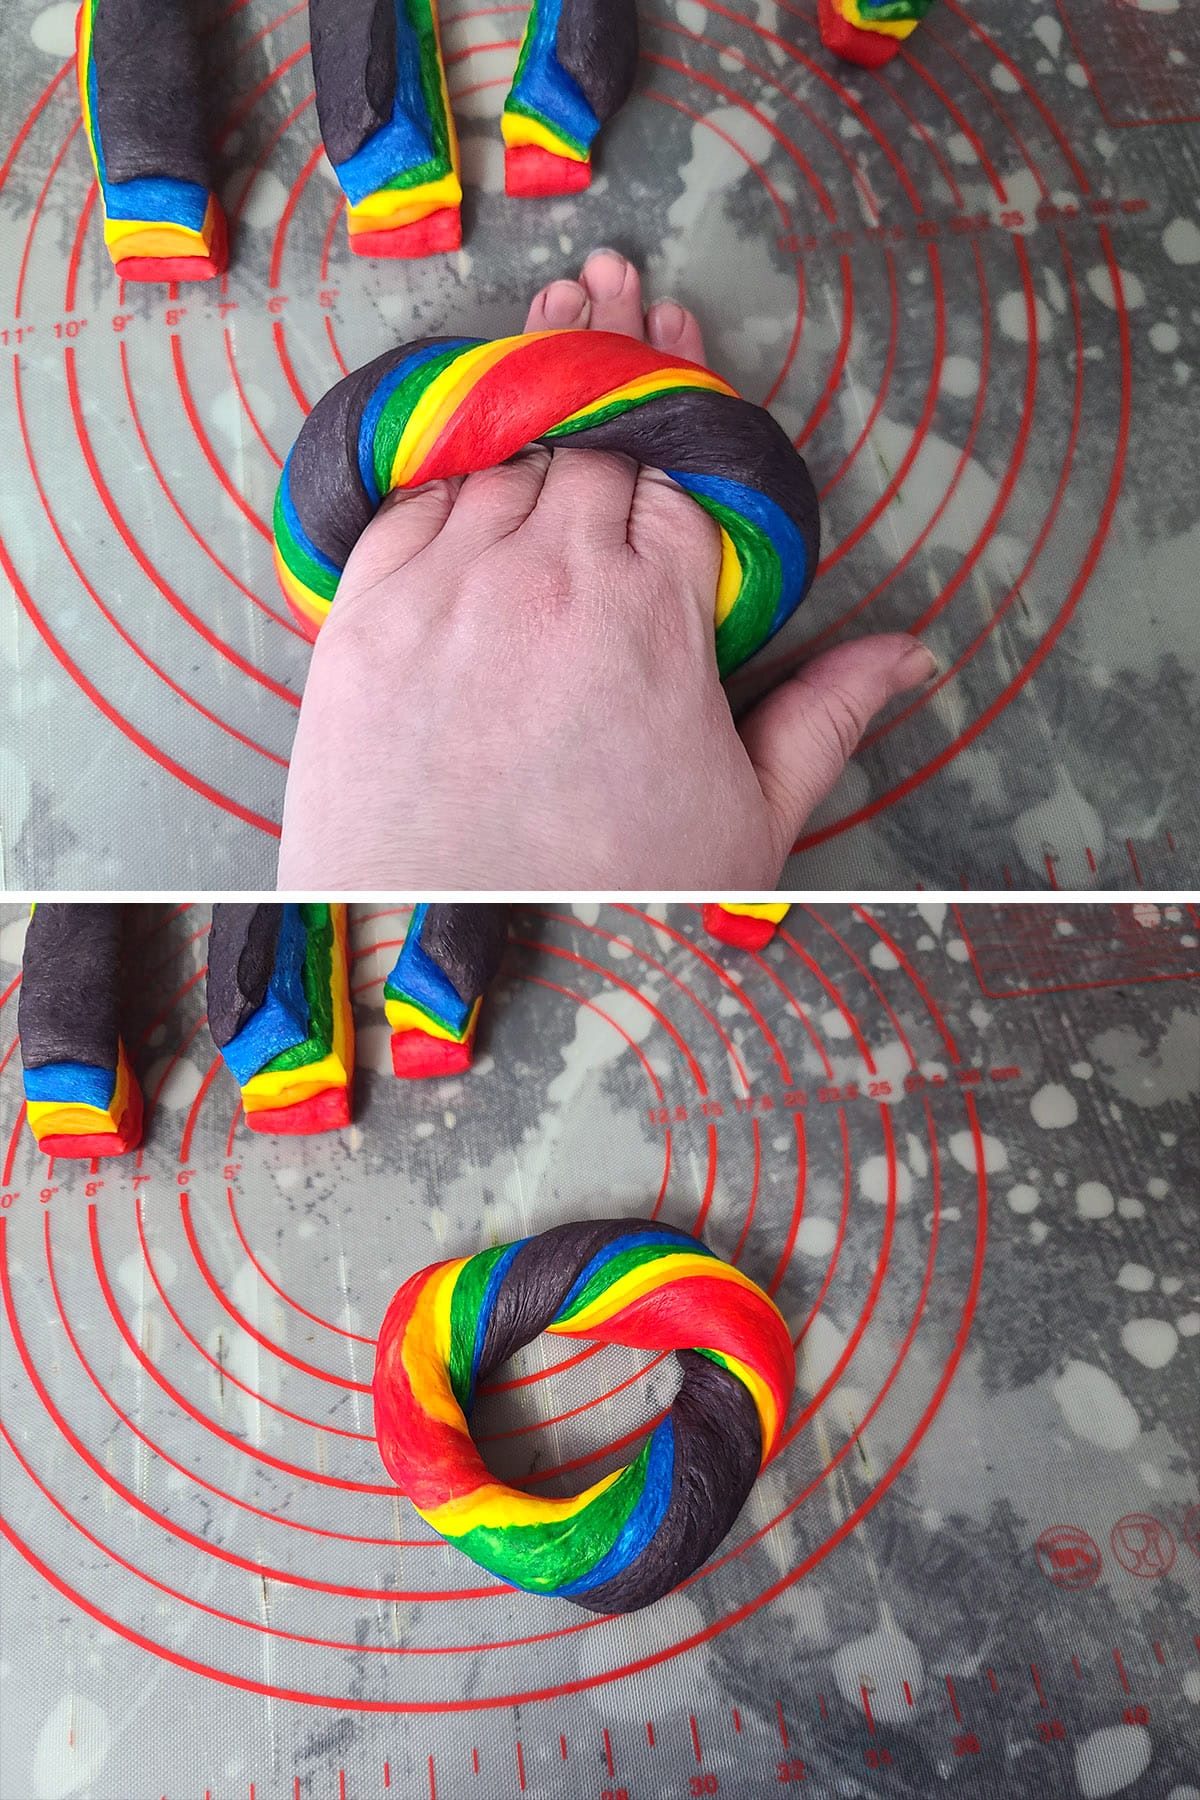 A 2 part image showing the dough being pressed together, and a finished round of twisted rainbow dough in bagel shape.